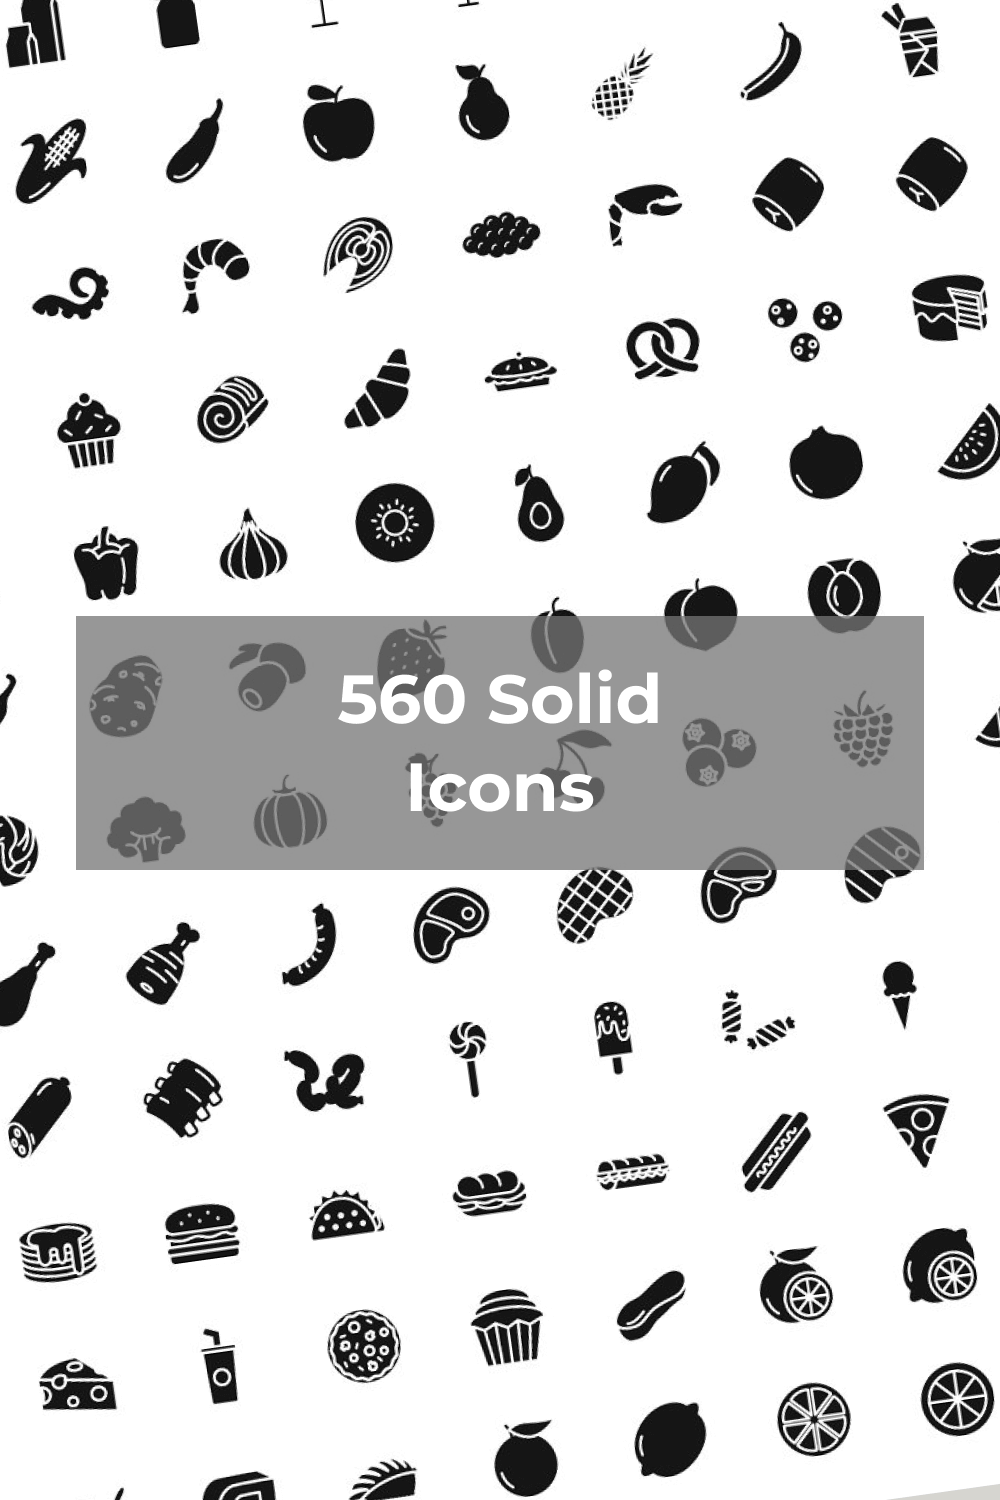 560 tilted solid icons.